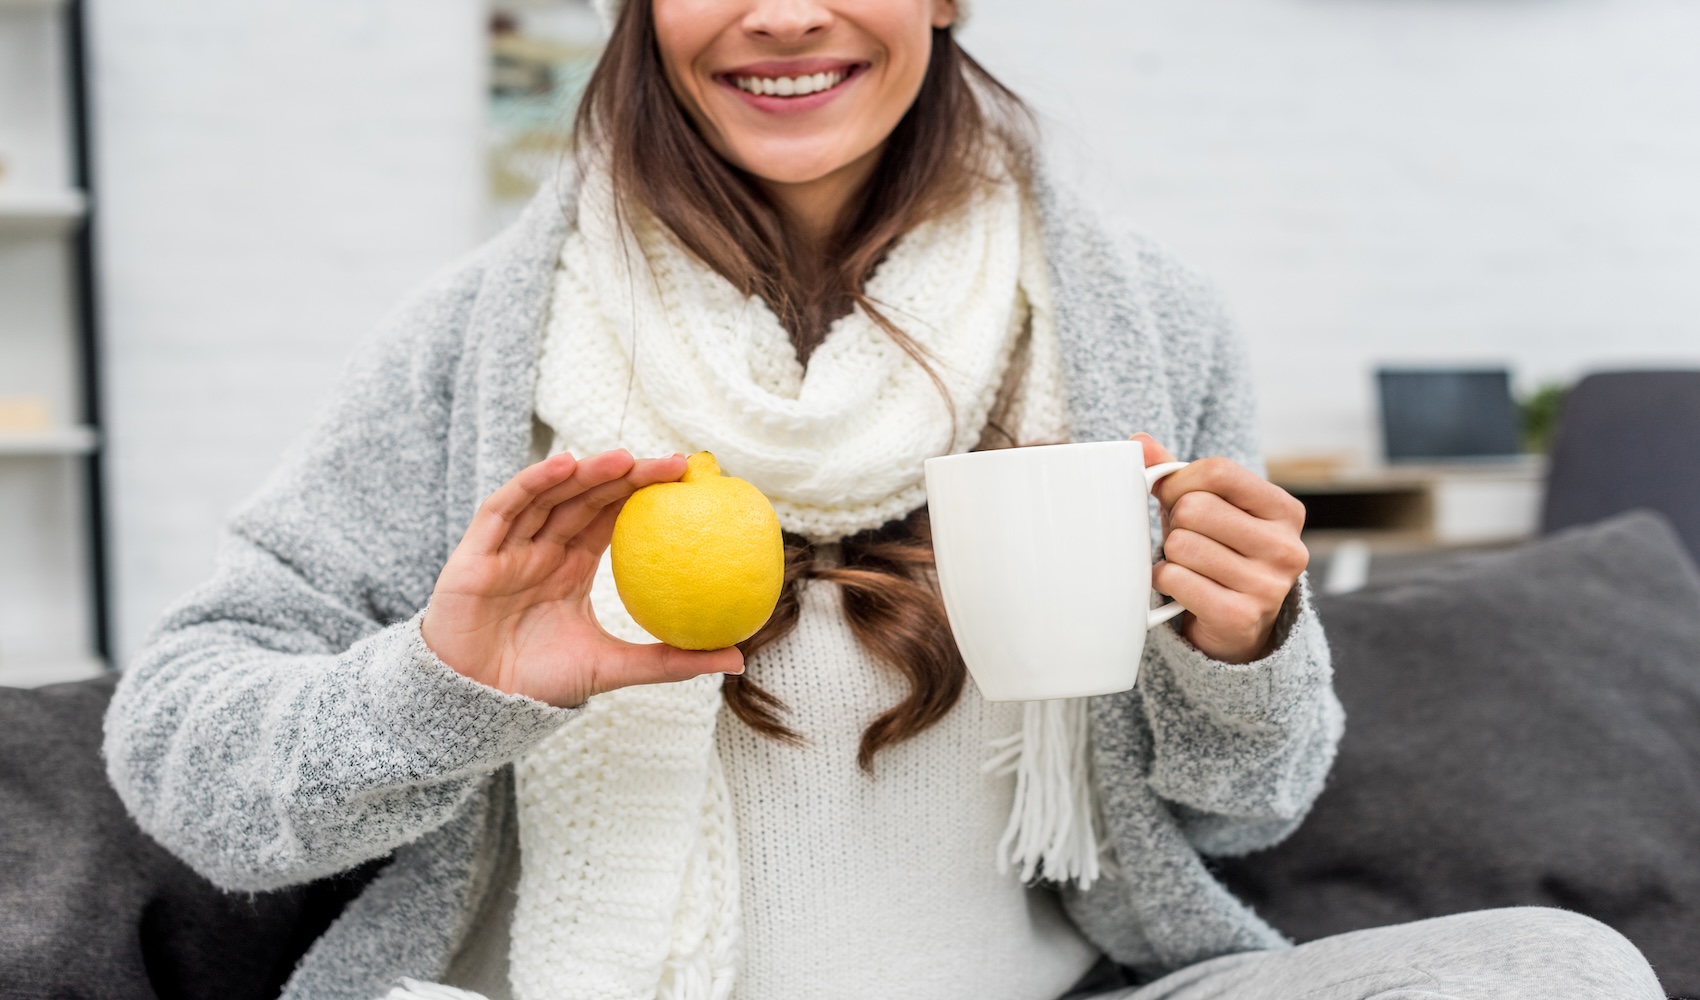 11 Health and Wellness Tips to Help You Beat the Winter Blues